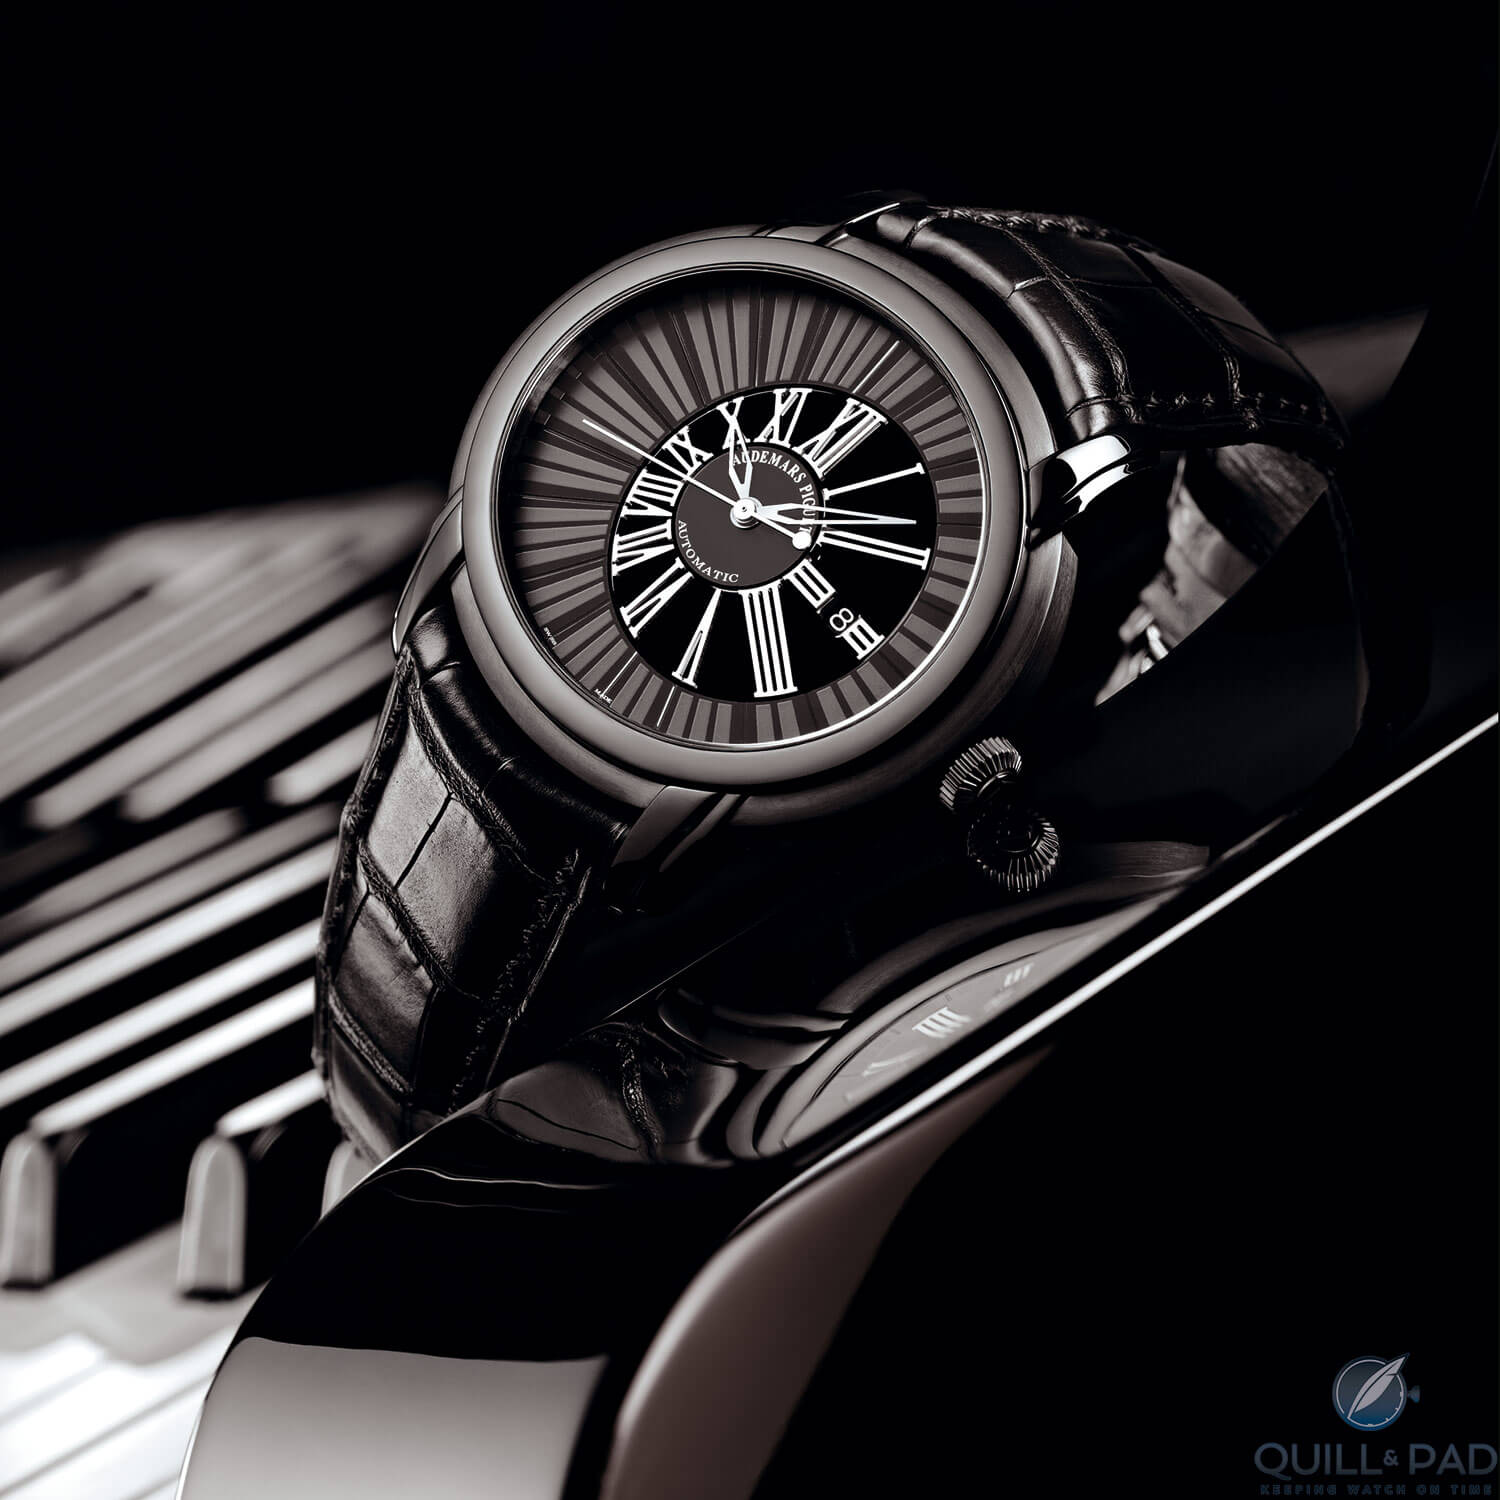 The Audemars Piguet Millenary Quincy Jones from 2009 to benefit the musician’s charity foundation